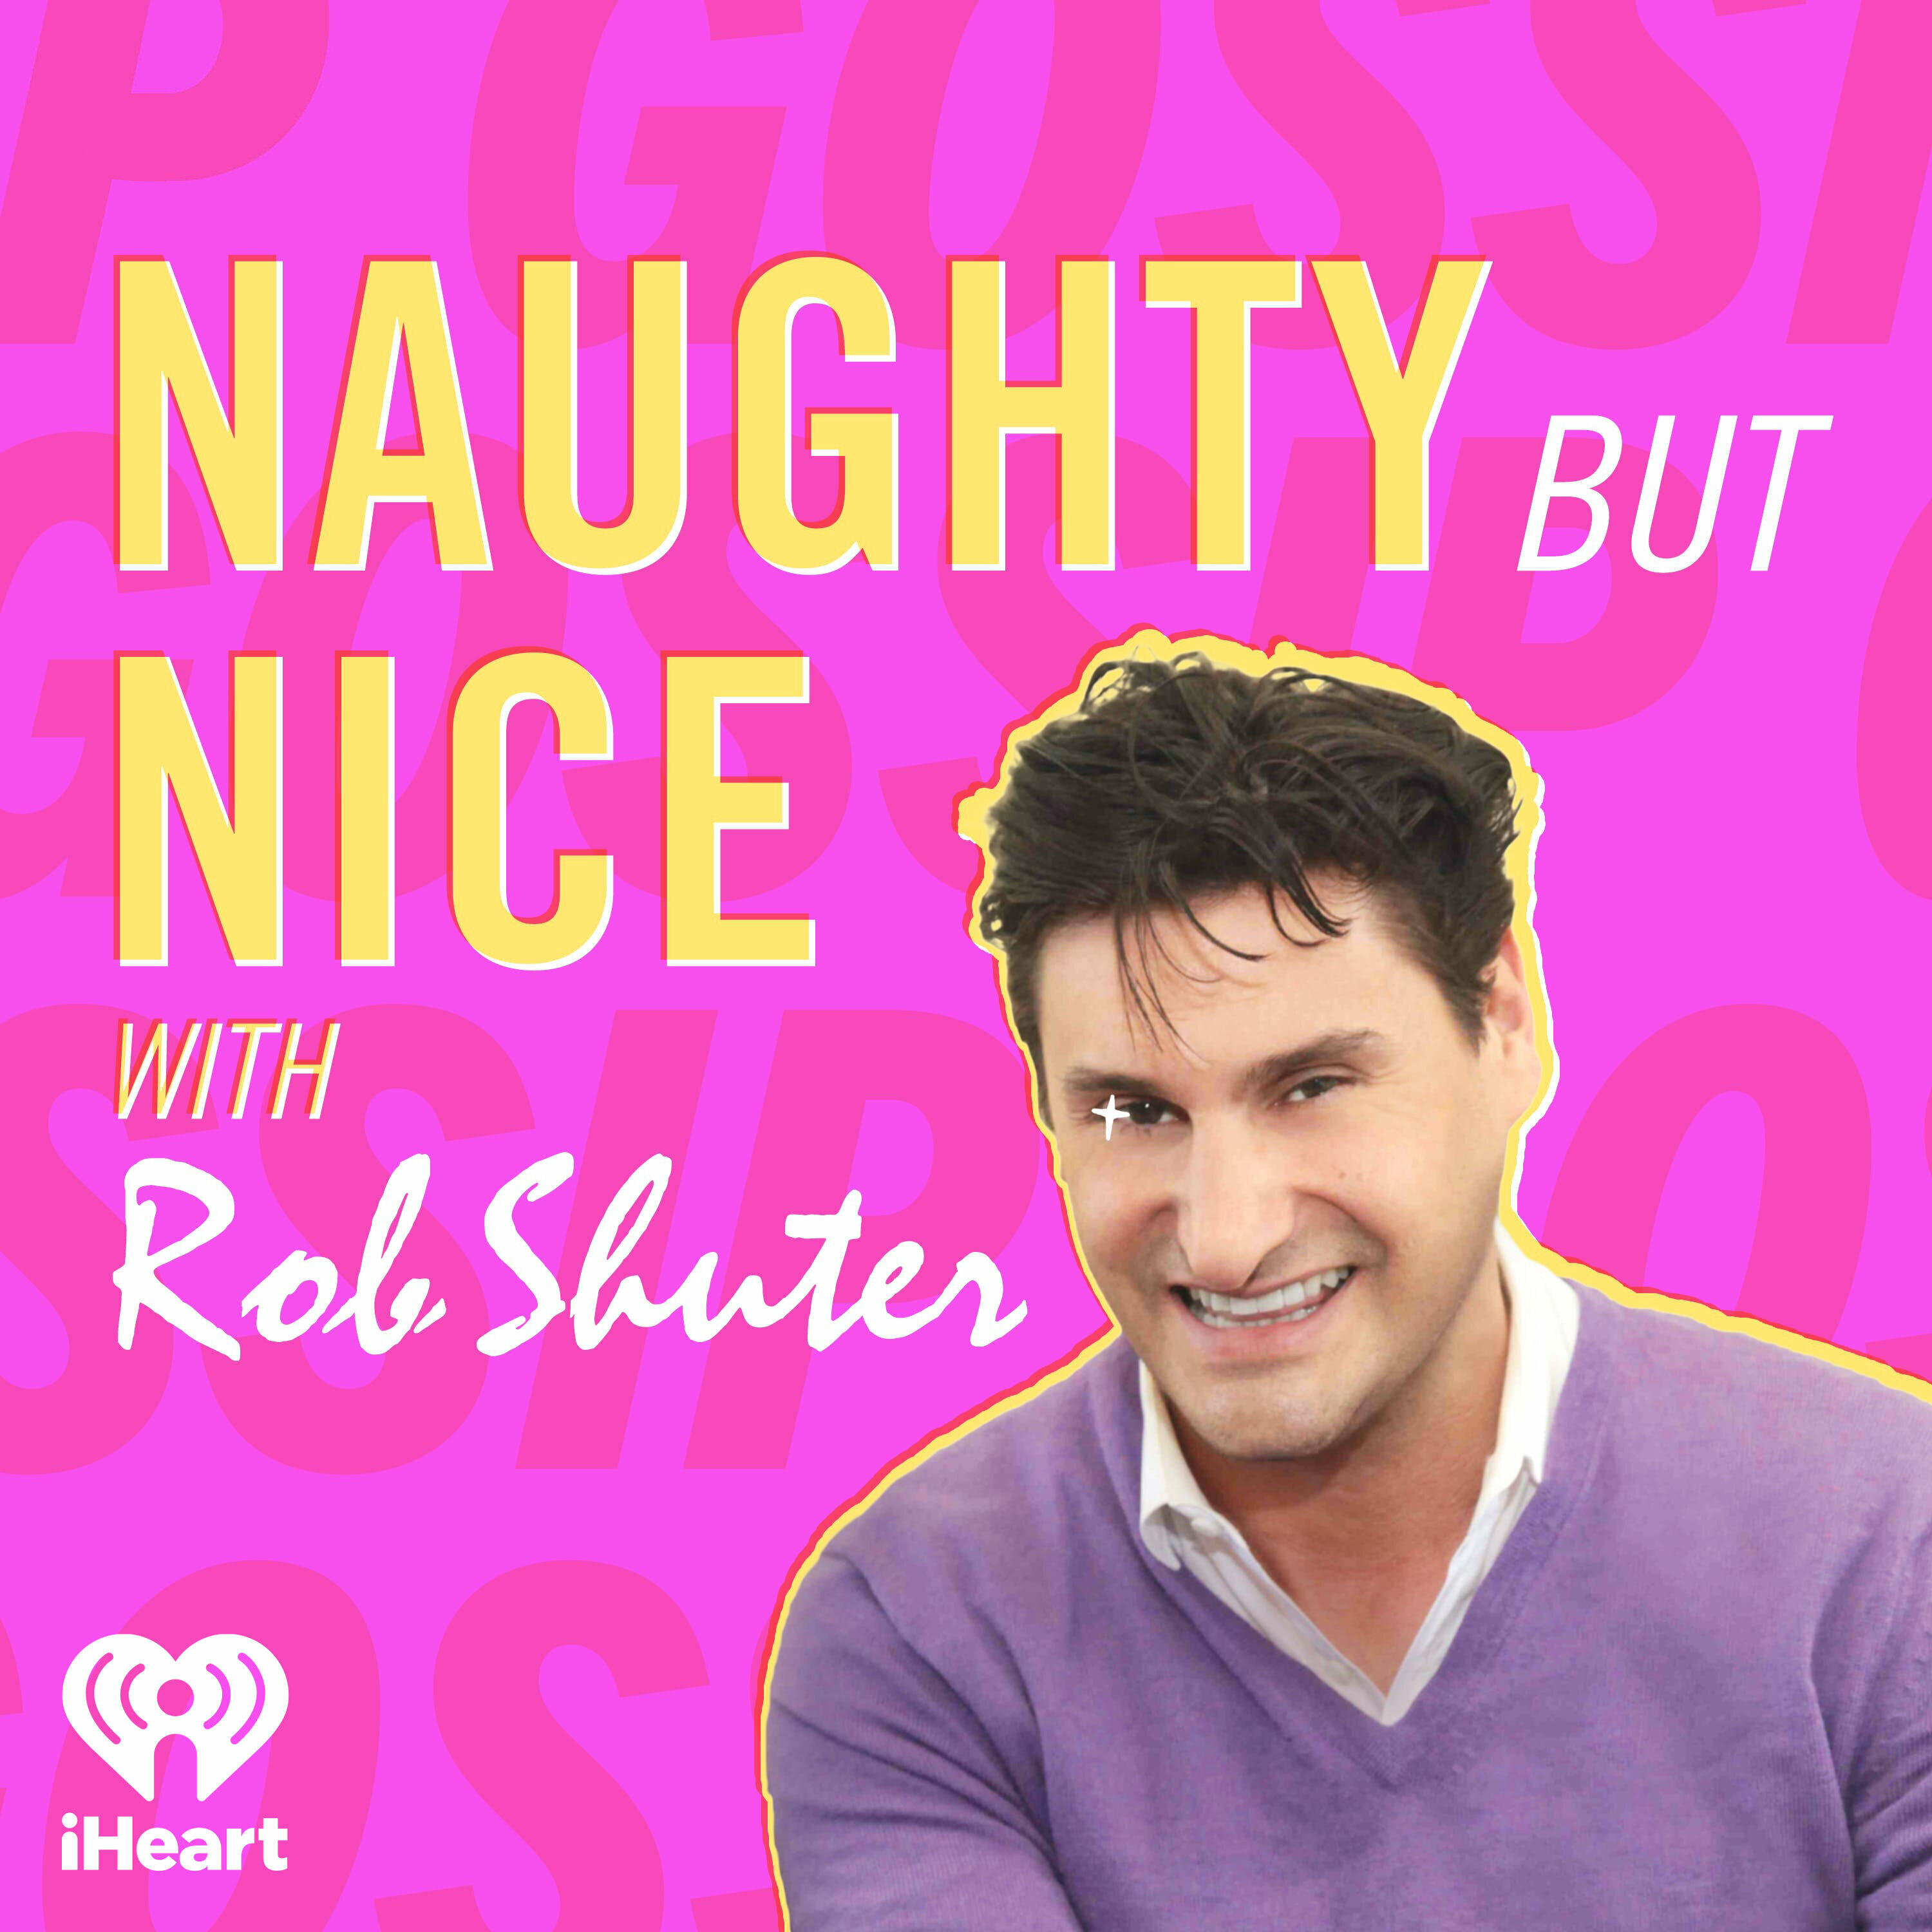 Listen Free To Naughty But Nice With Rob Shuter On Iheartradio Podcasts